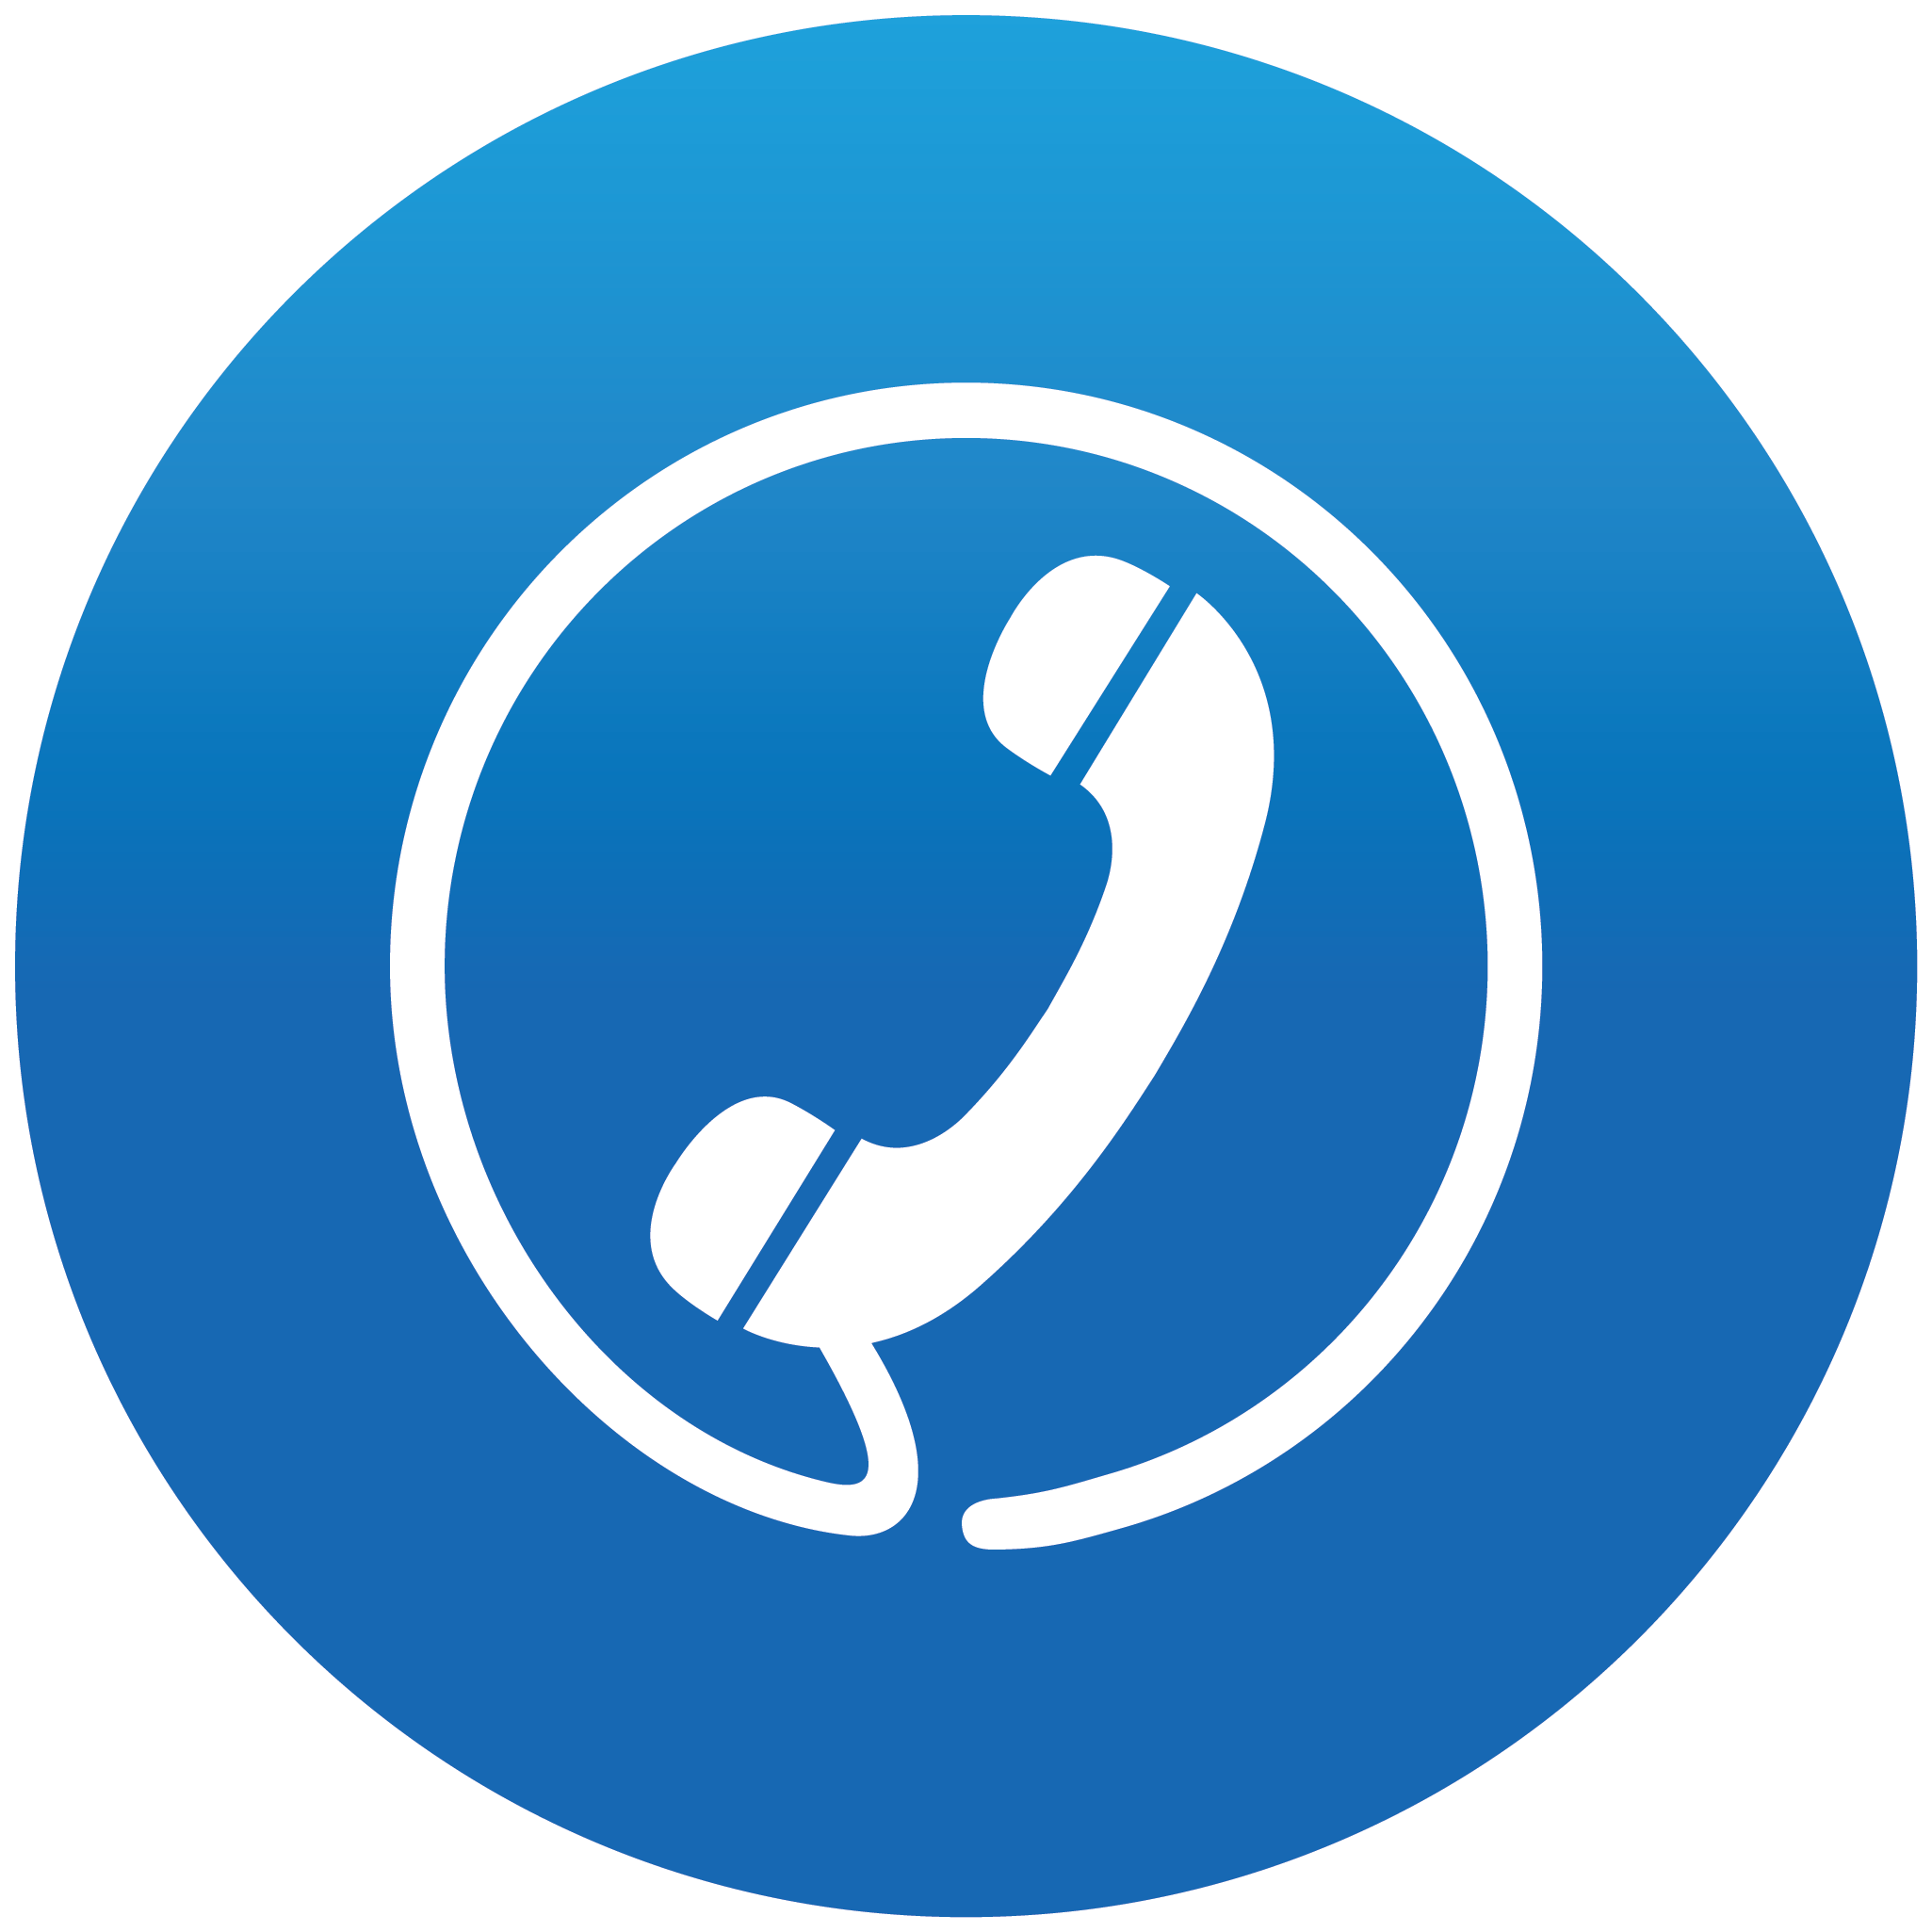 phone support clipart - photo #17